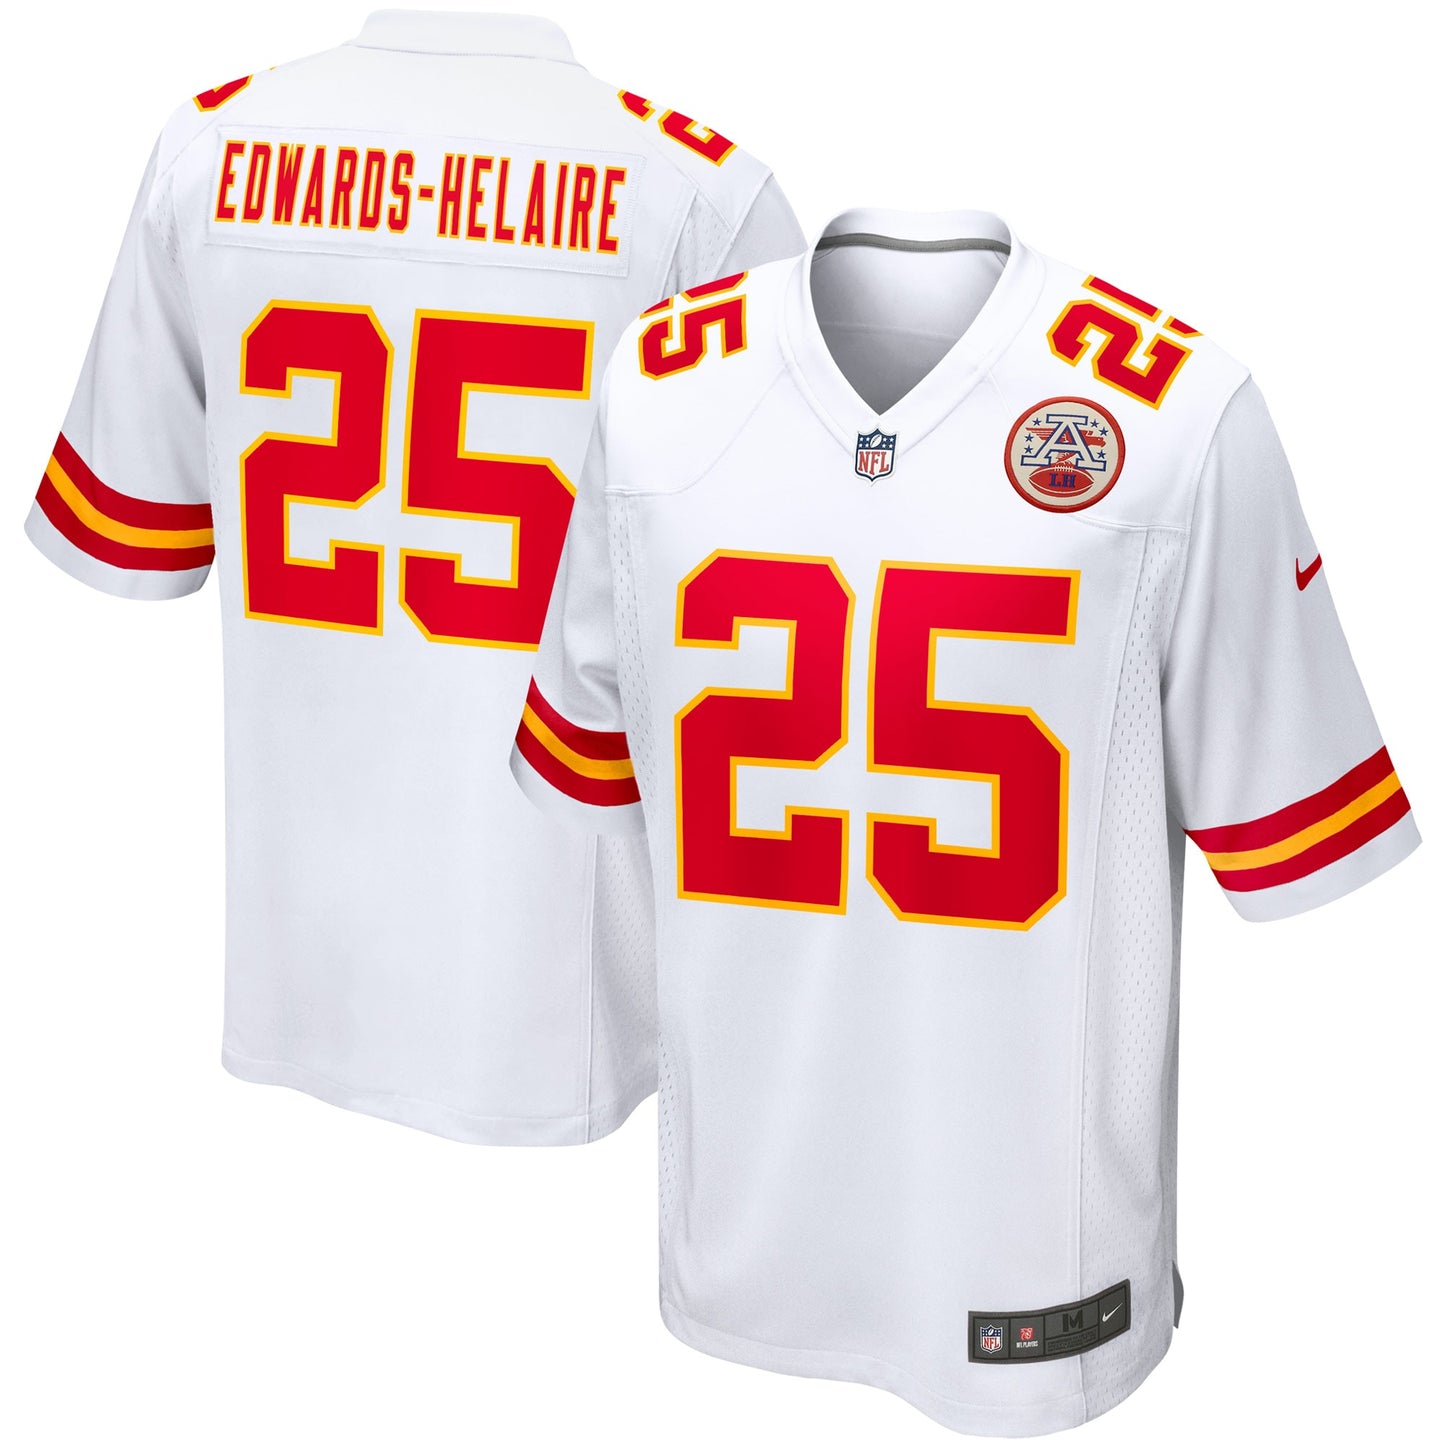 Clyde Edwards-Helaire Kansas City Chiefs Nike Game Jersey - White